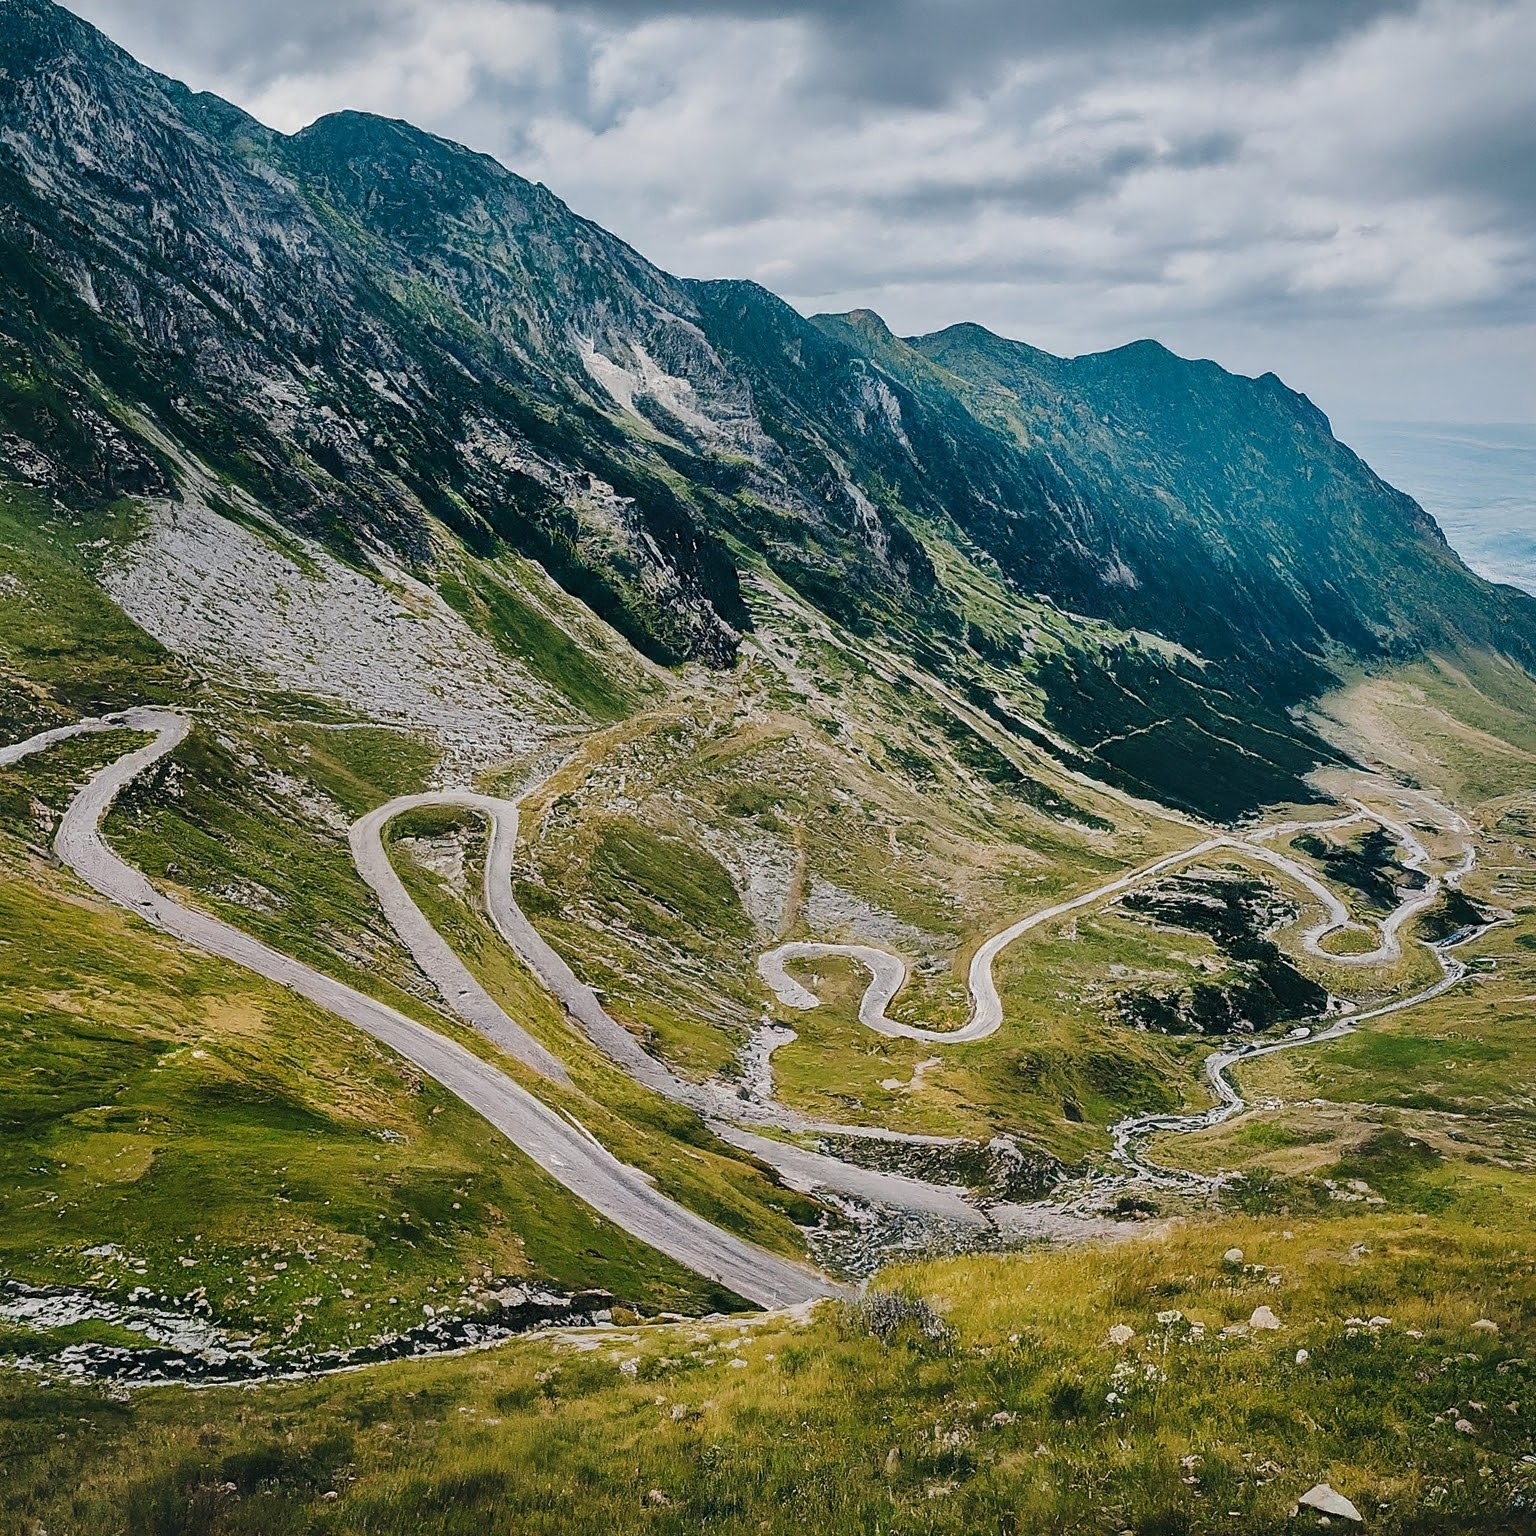 Cyclist on a scenic bend of the Transfagarasan Road in Romania, with mountain views.